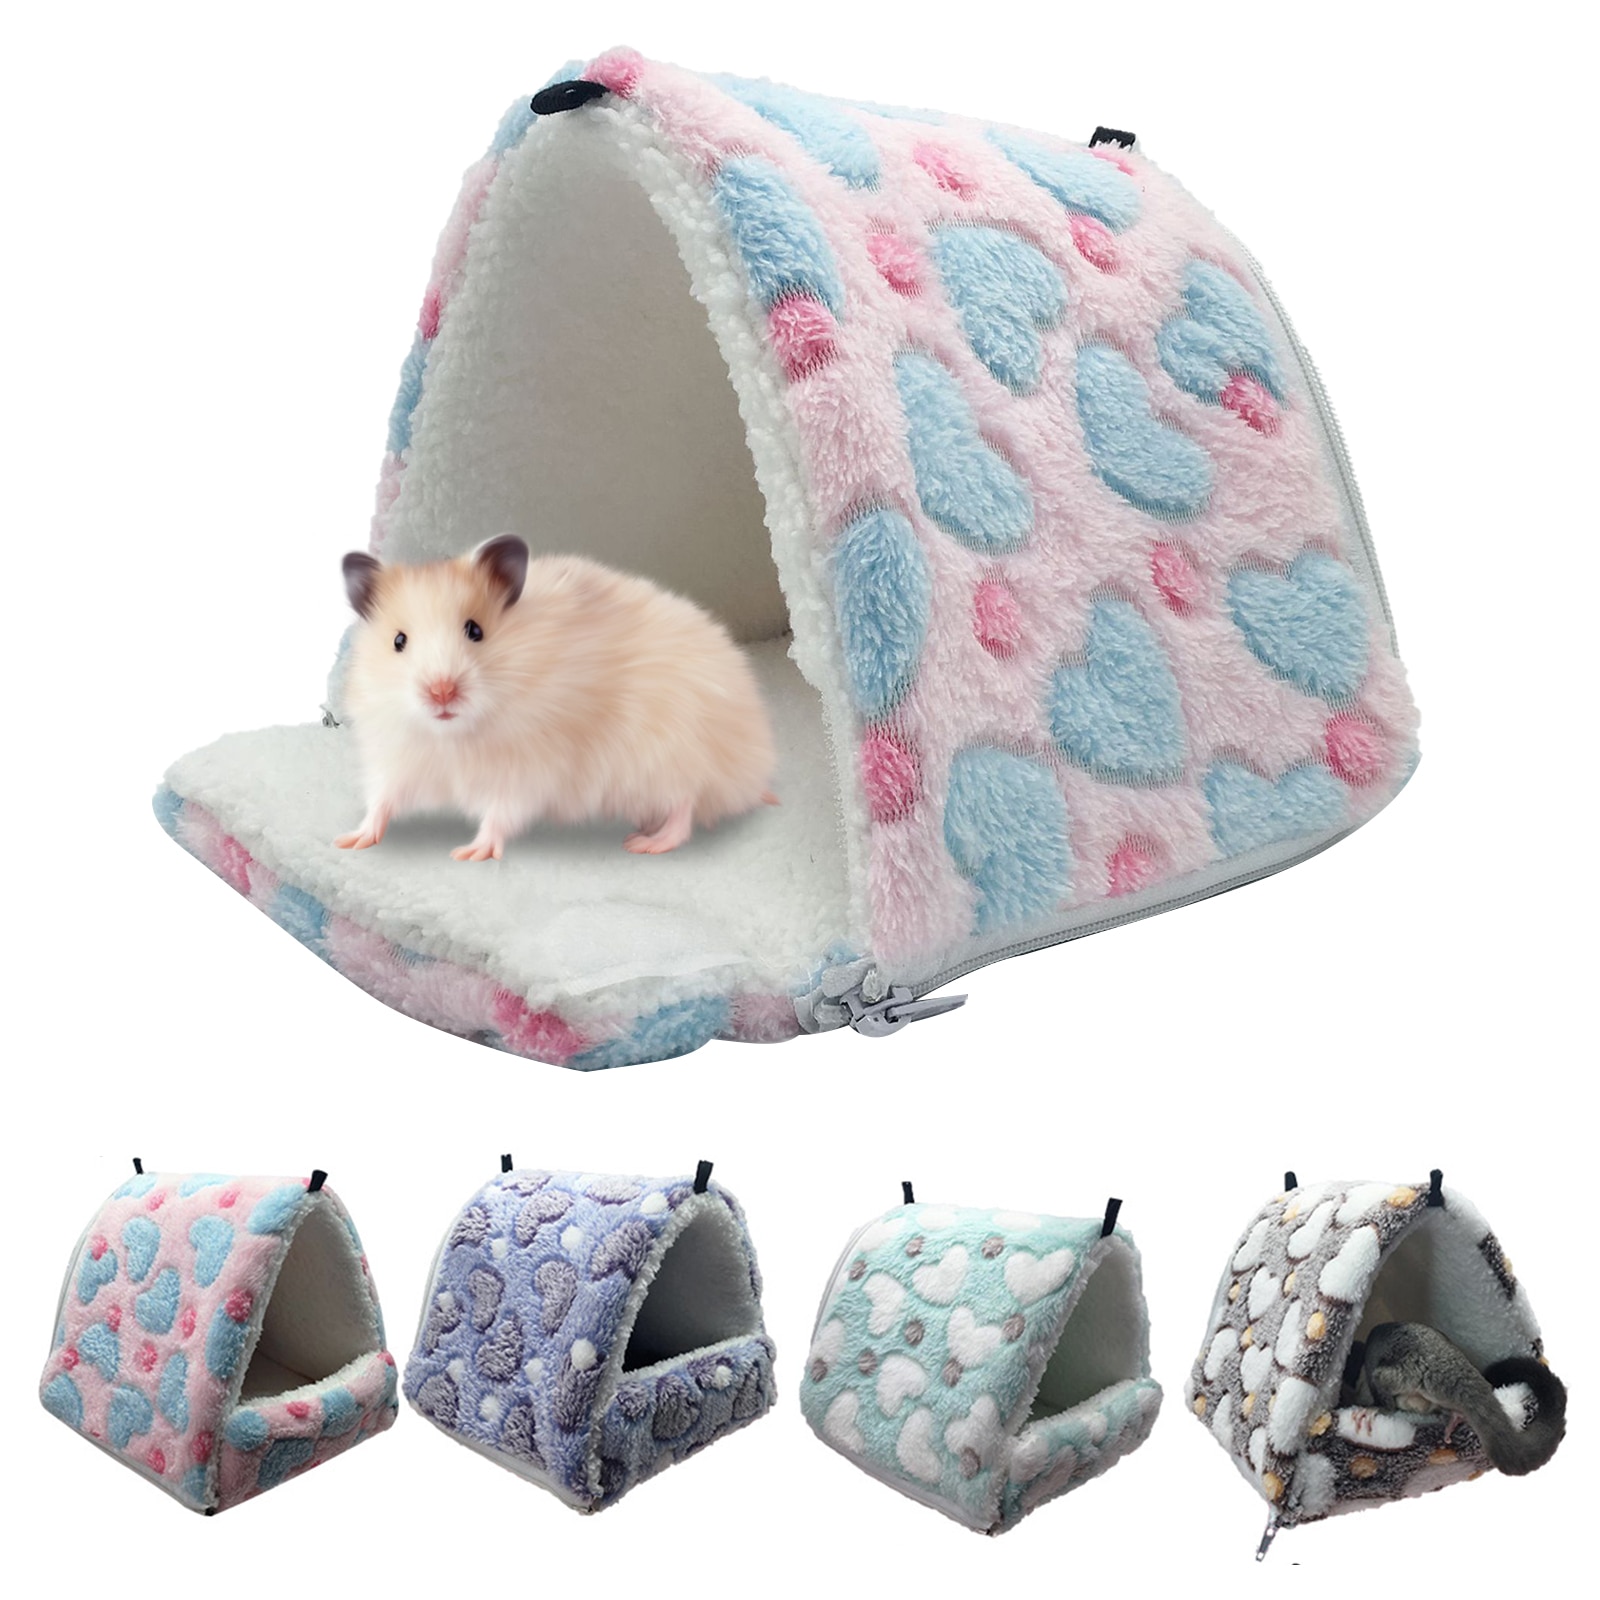 Hamster Hanging House Hammock Cage Sleeping Nest Pet Bed Rat Hamster Toys Cage Swing Pet Banana Design Small Animals